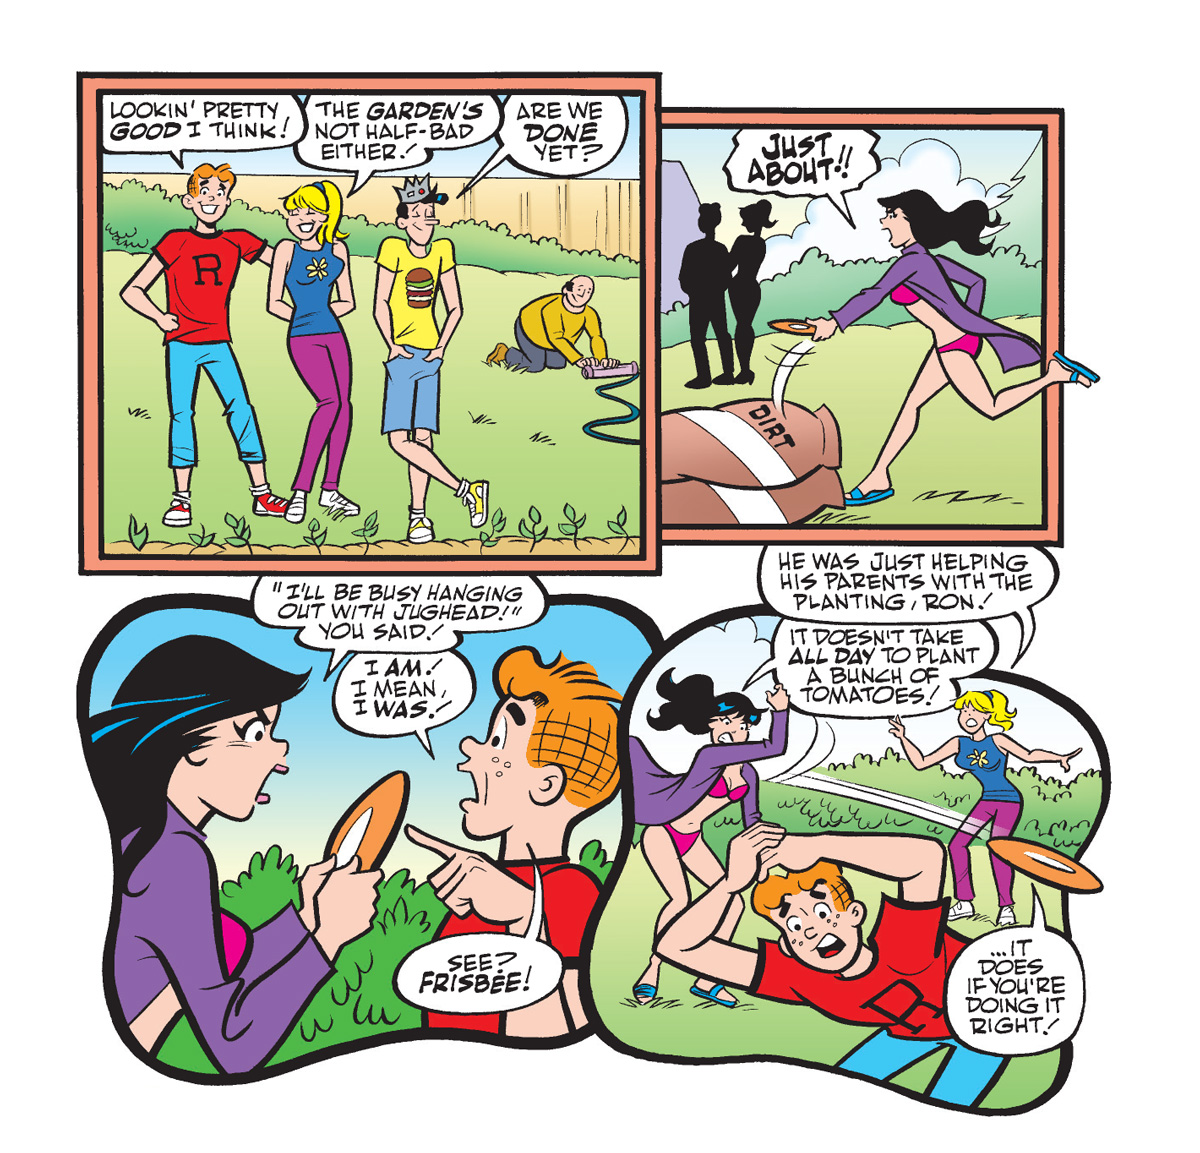 Panels from an Archie Comics story. Archie, Betty, and Jughead have finished planting a garden with Archie's dad Fred in the background. Veronica shows up angry because Archie had said he was hanging out with Jughead but she caught them gardening instead.